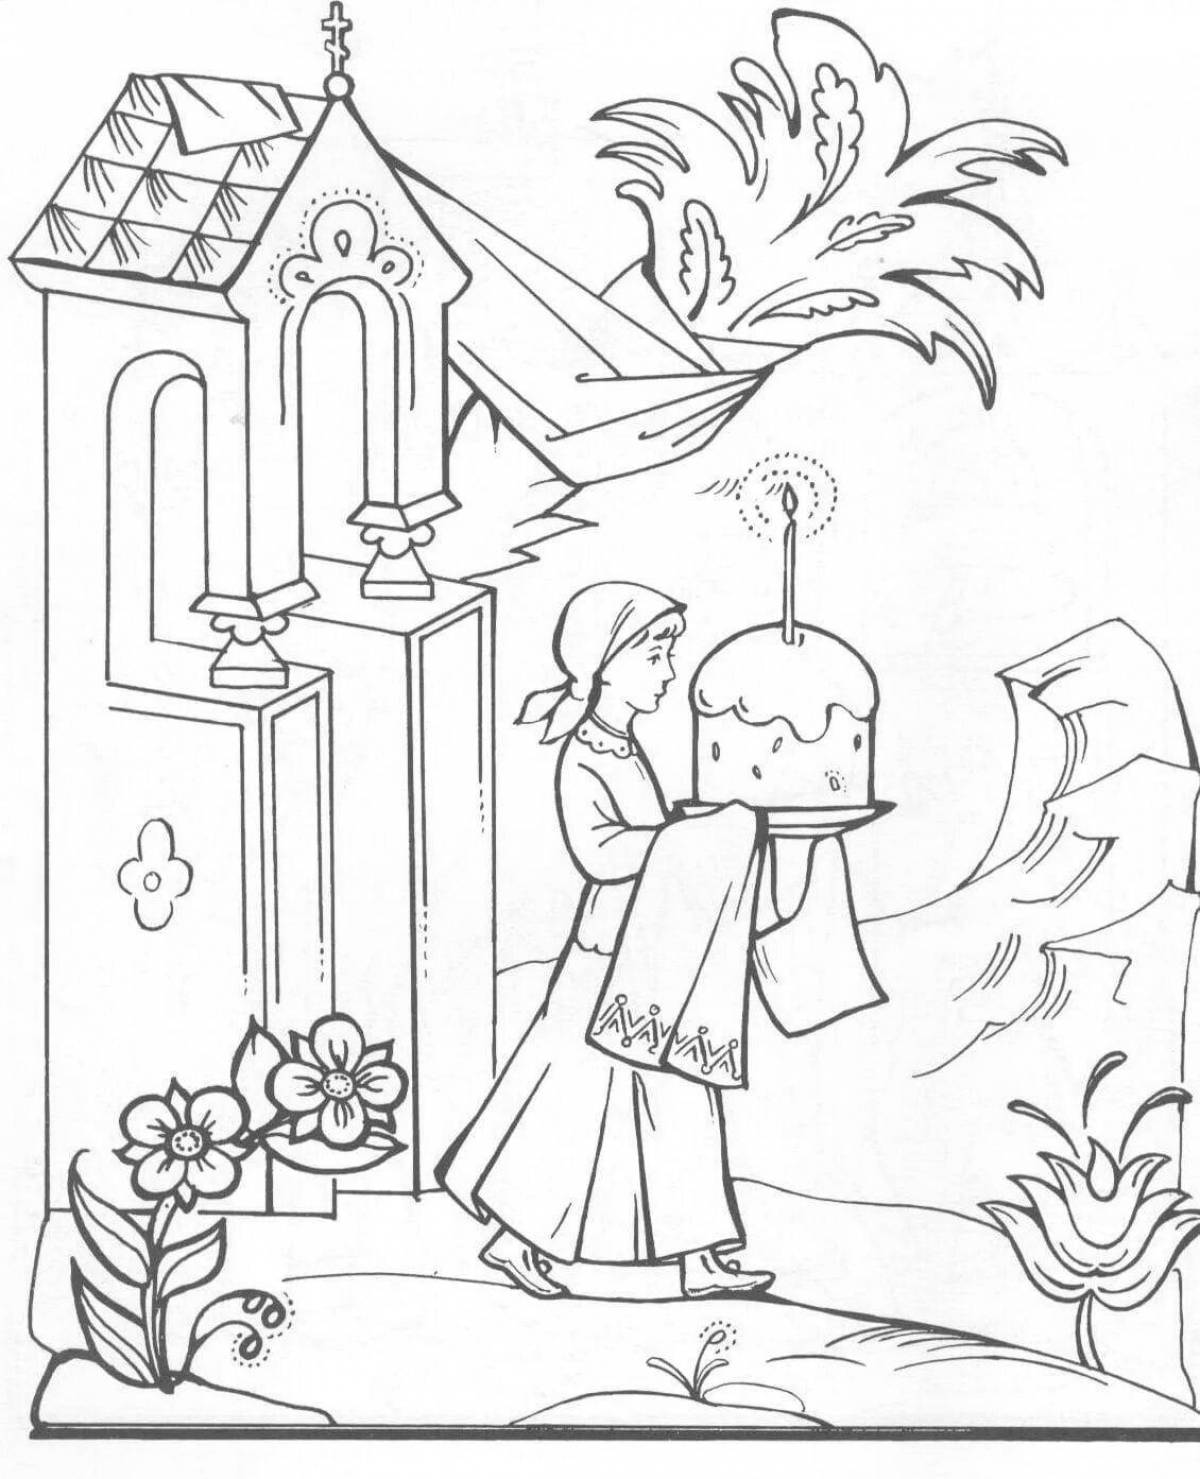 Coloring page merry orthodox holiday